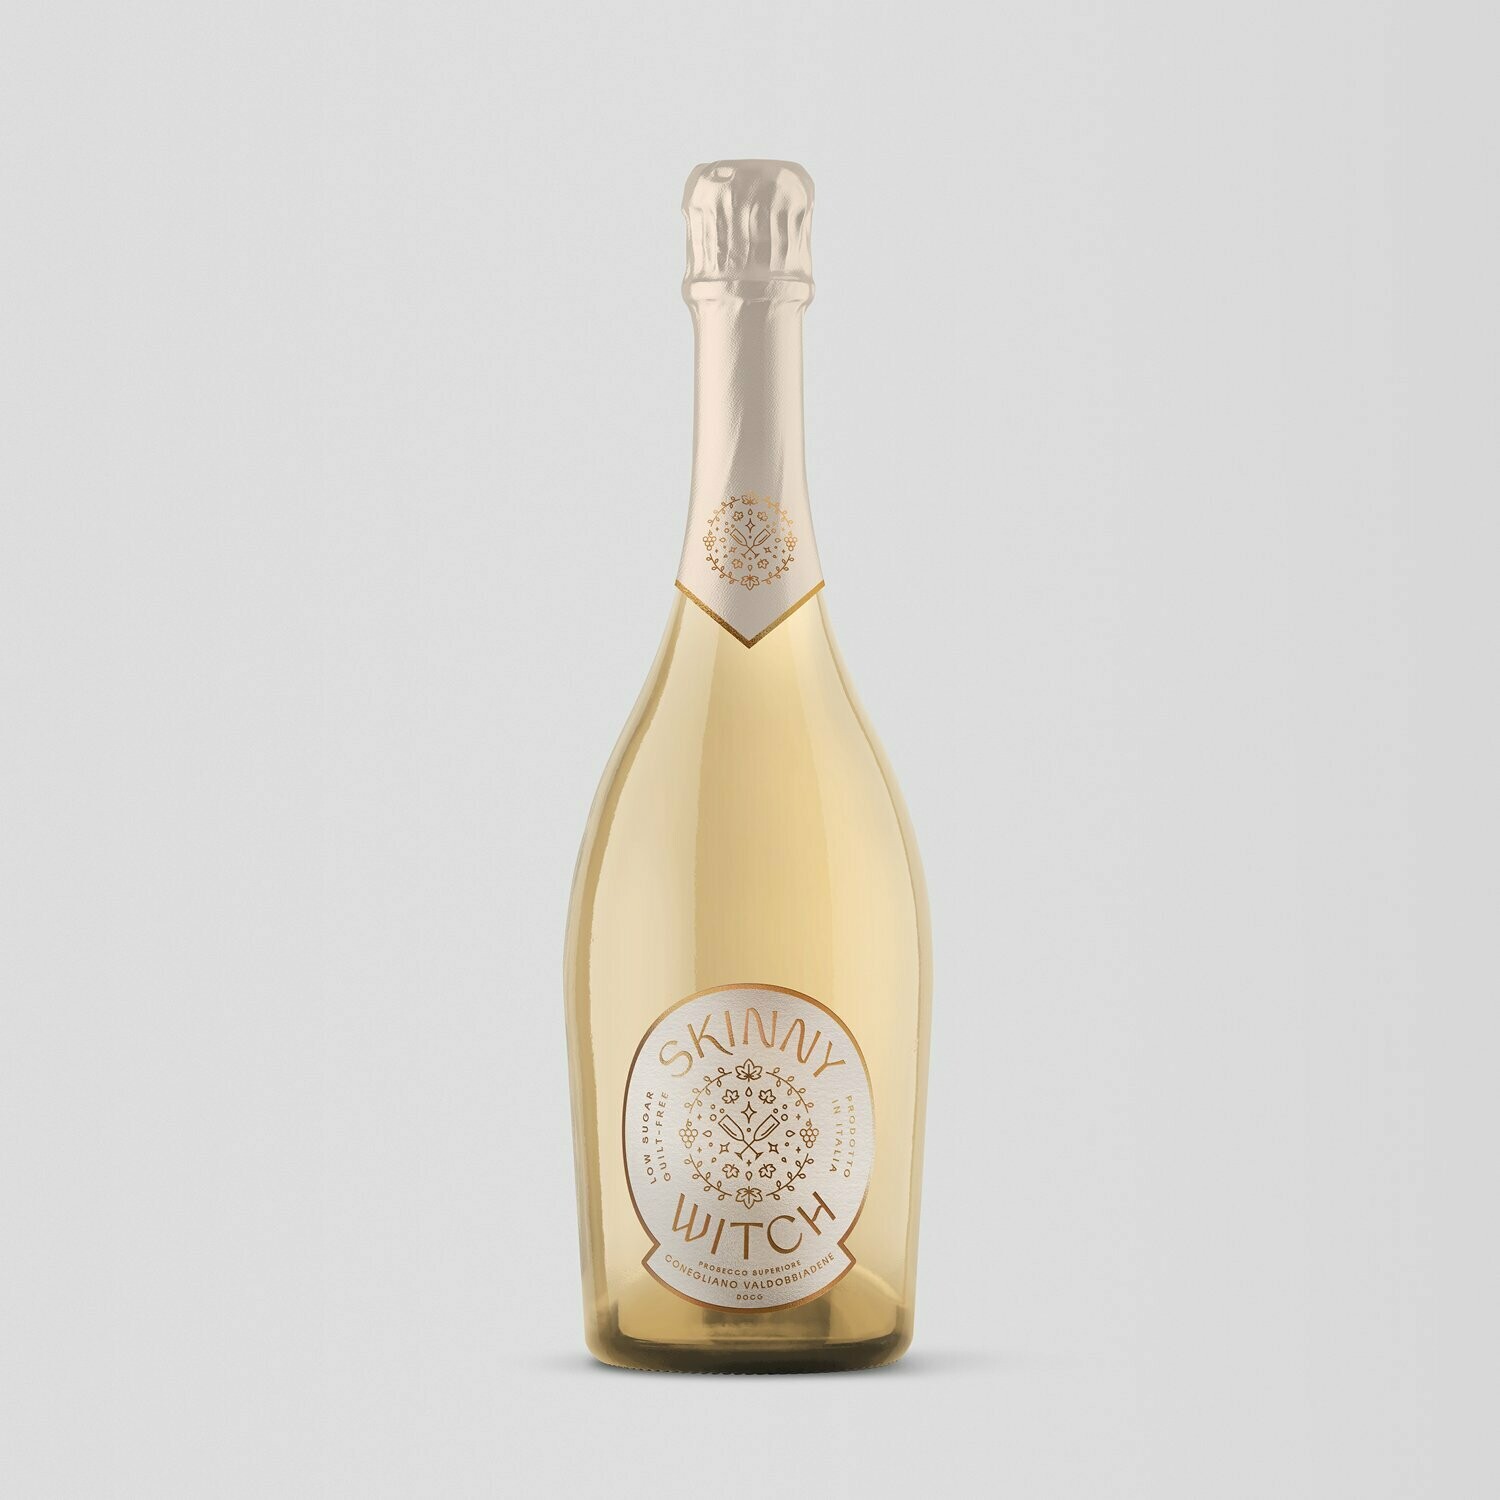 Skinny Witch Prosecco DOCG (75cl)